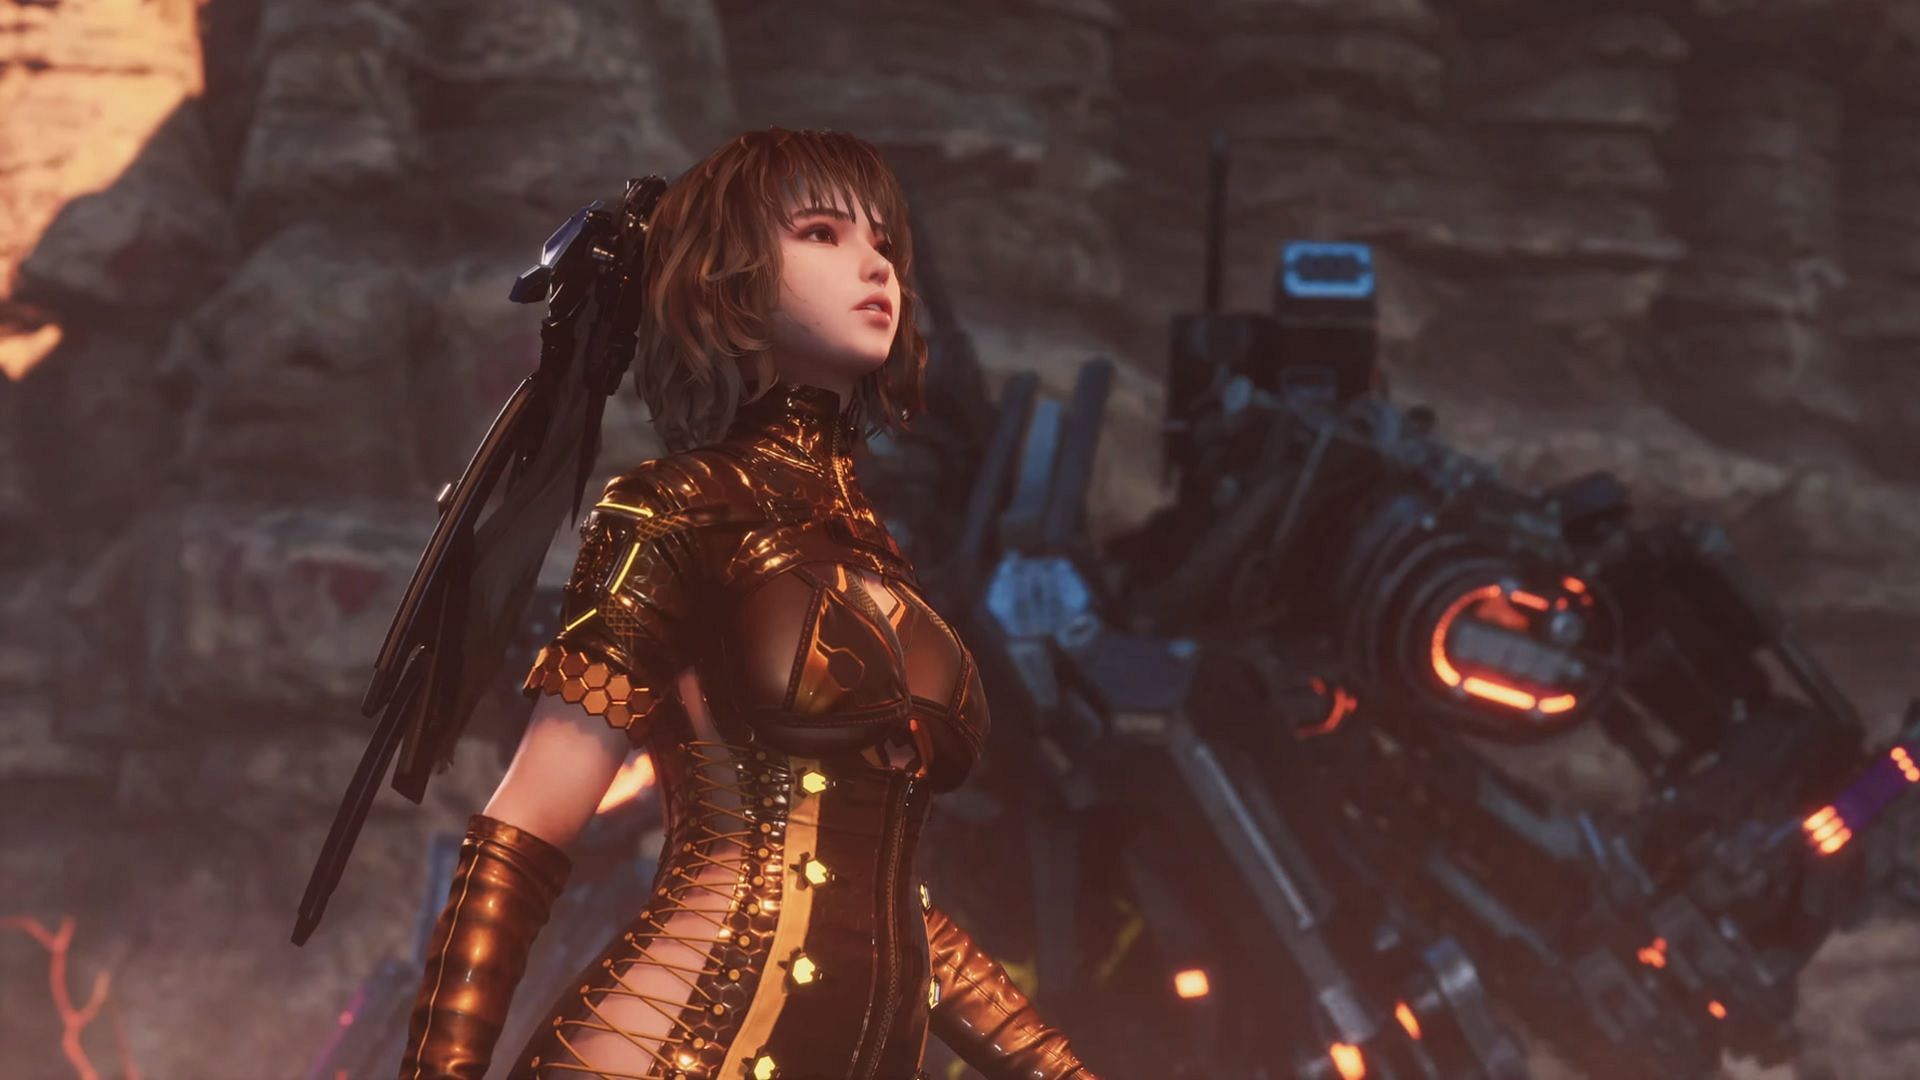 Stellar Blade has emerged as the best selling game in Japan with nearly 70,000 sold copies following a global debut